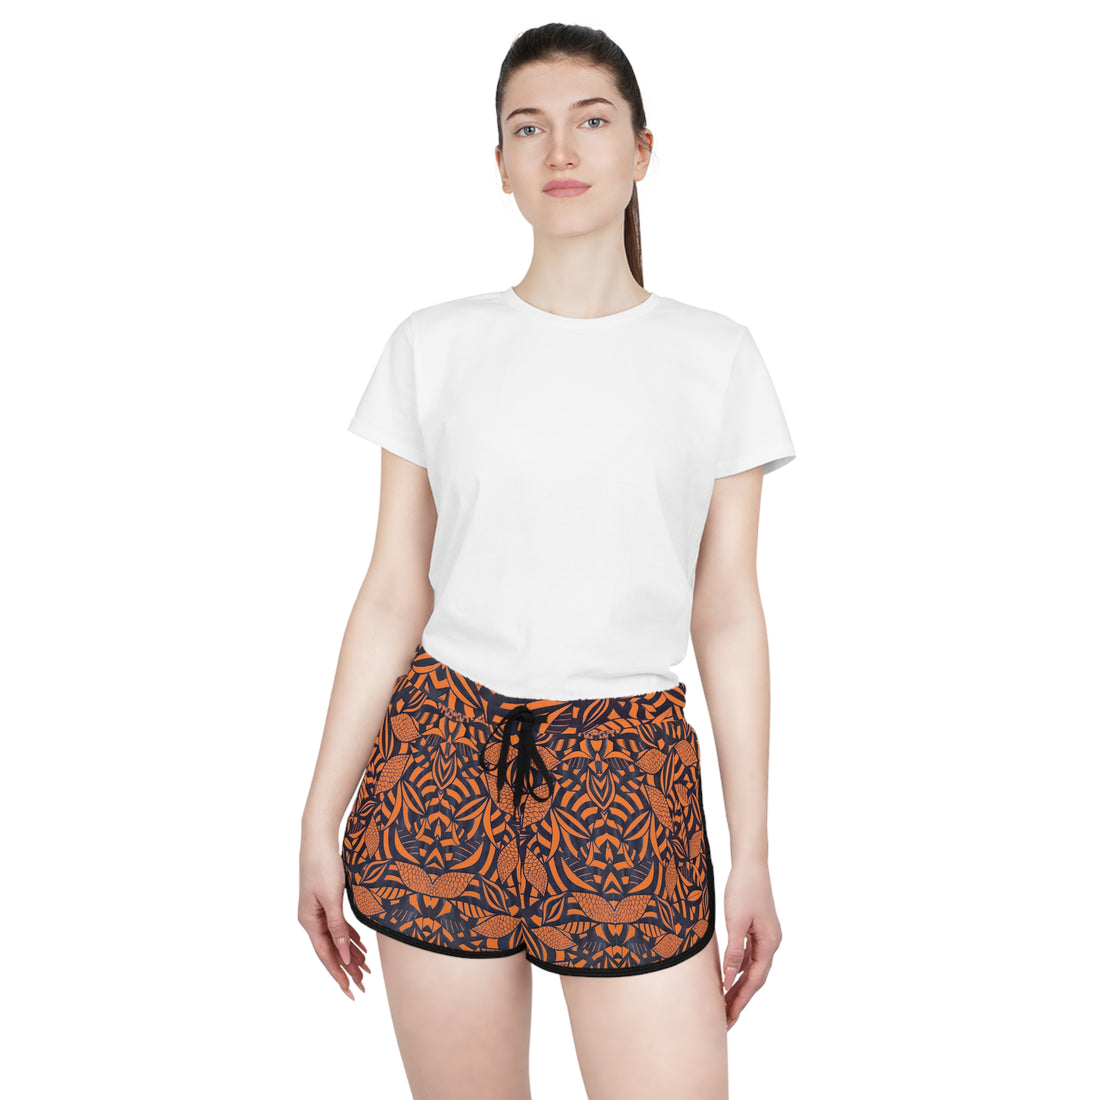 Tropical Minimalist Relaxed Shorts